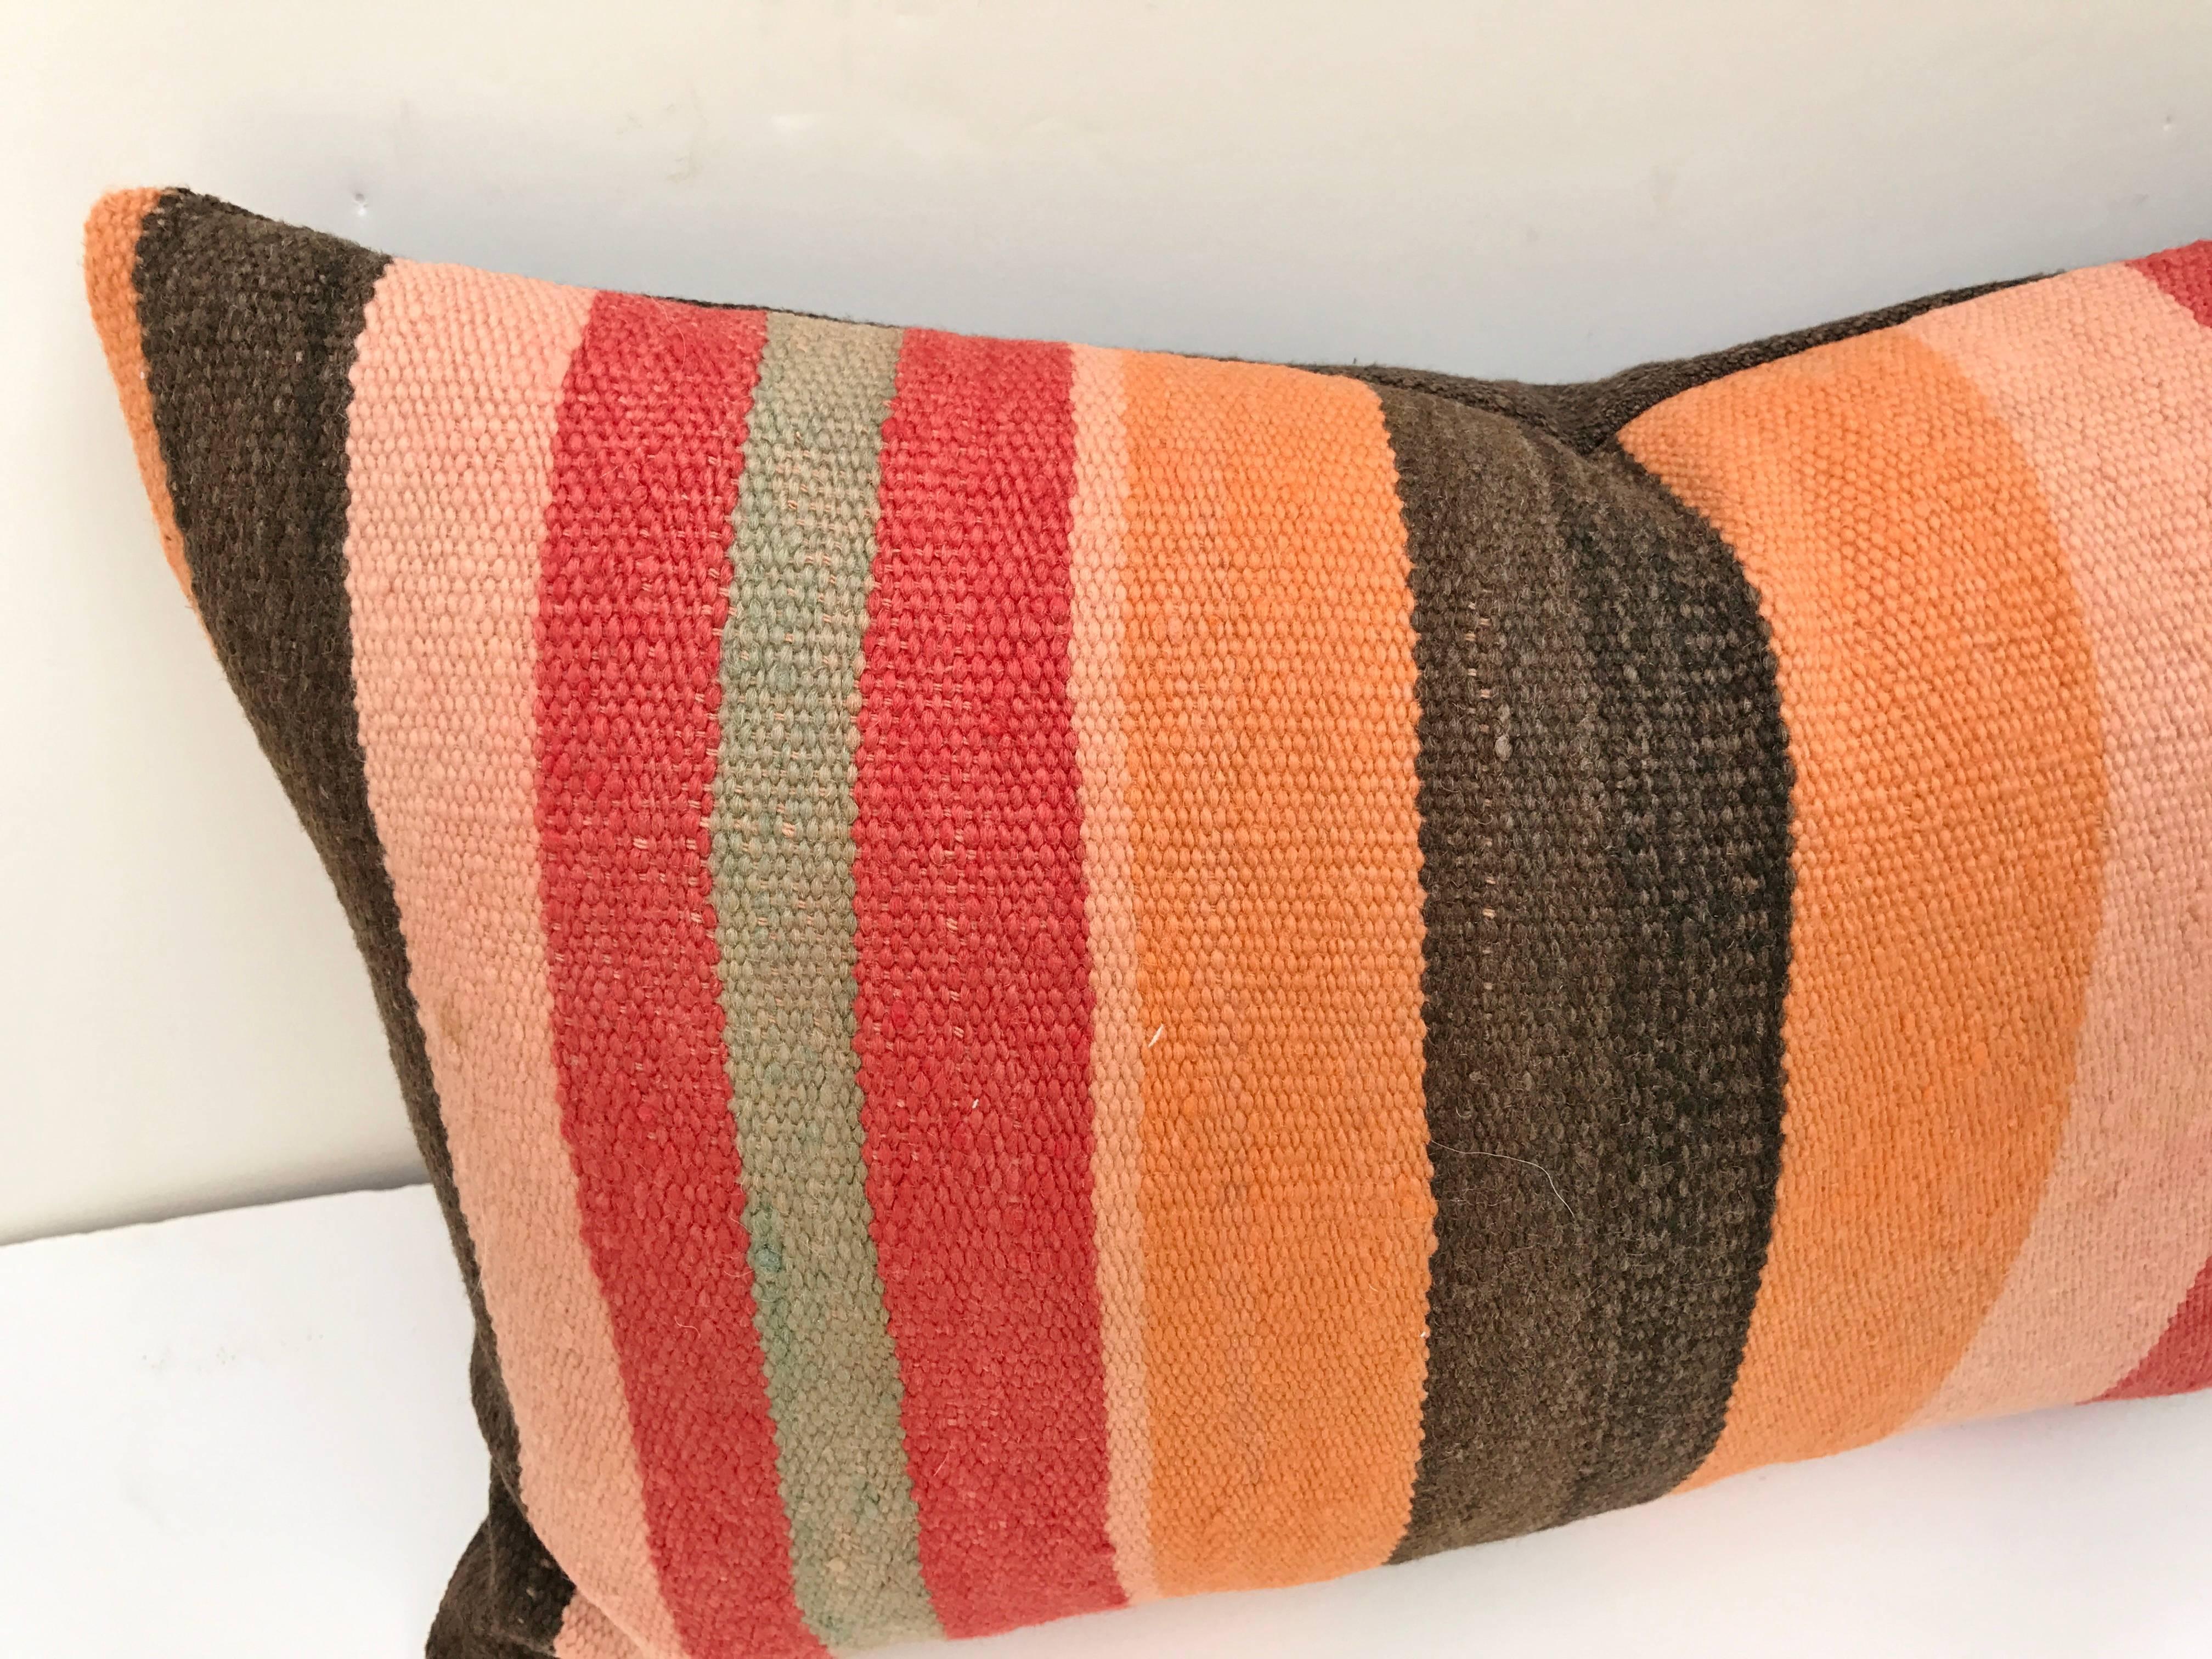 Custom pillow cut from a hand-loomed wool Moroccan Berber rug from the Atlas Mountains. Wool is soft and lustrous with natural dyes, Pillow is backed in a dark brown linen blend, filled with an insert of 50/50 down and feathers and hand-sewn closed.